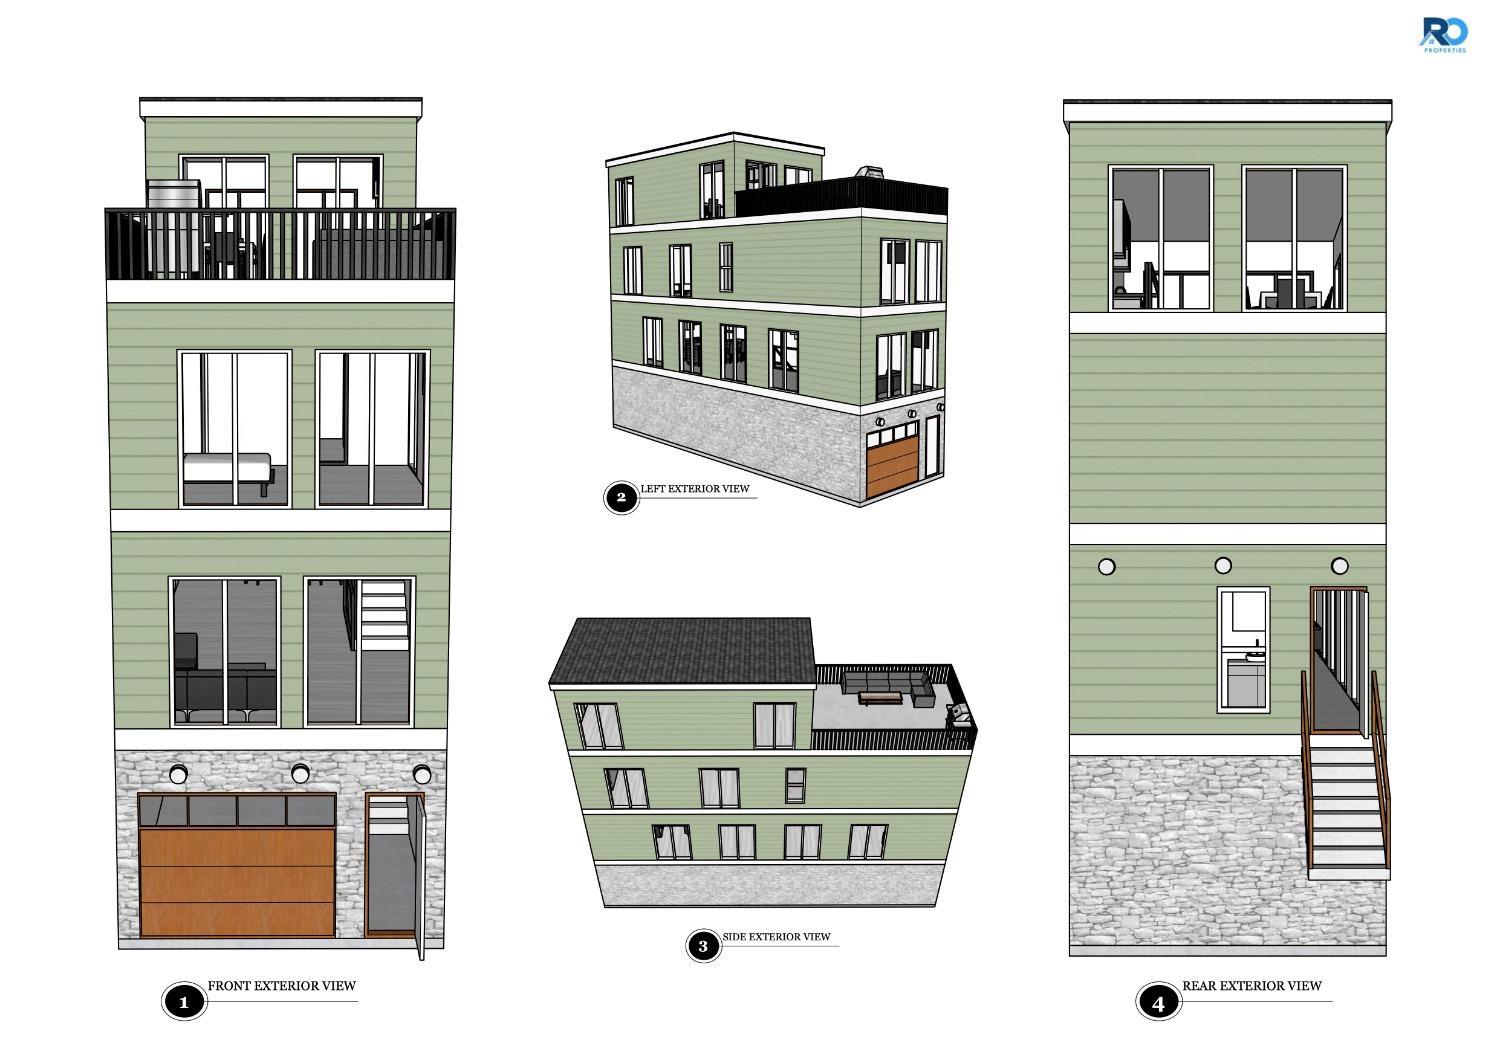 Become a part of the Renaissance in the Mohawk District.Your elegant new build will have a roof top deck and ample green space to enjoy and entertain. Stroll to the new Brewery Dist,cafes and shops. You will find a nice work/life balance with all that OTR has to offer, Findlay Market,entertainment,dining and TQL Stadium. Interior finishes can be customizable. Upon completion, the square footage will be 1950 sq ft of space